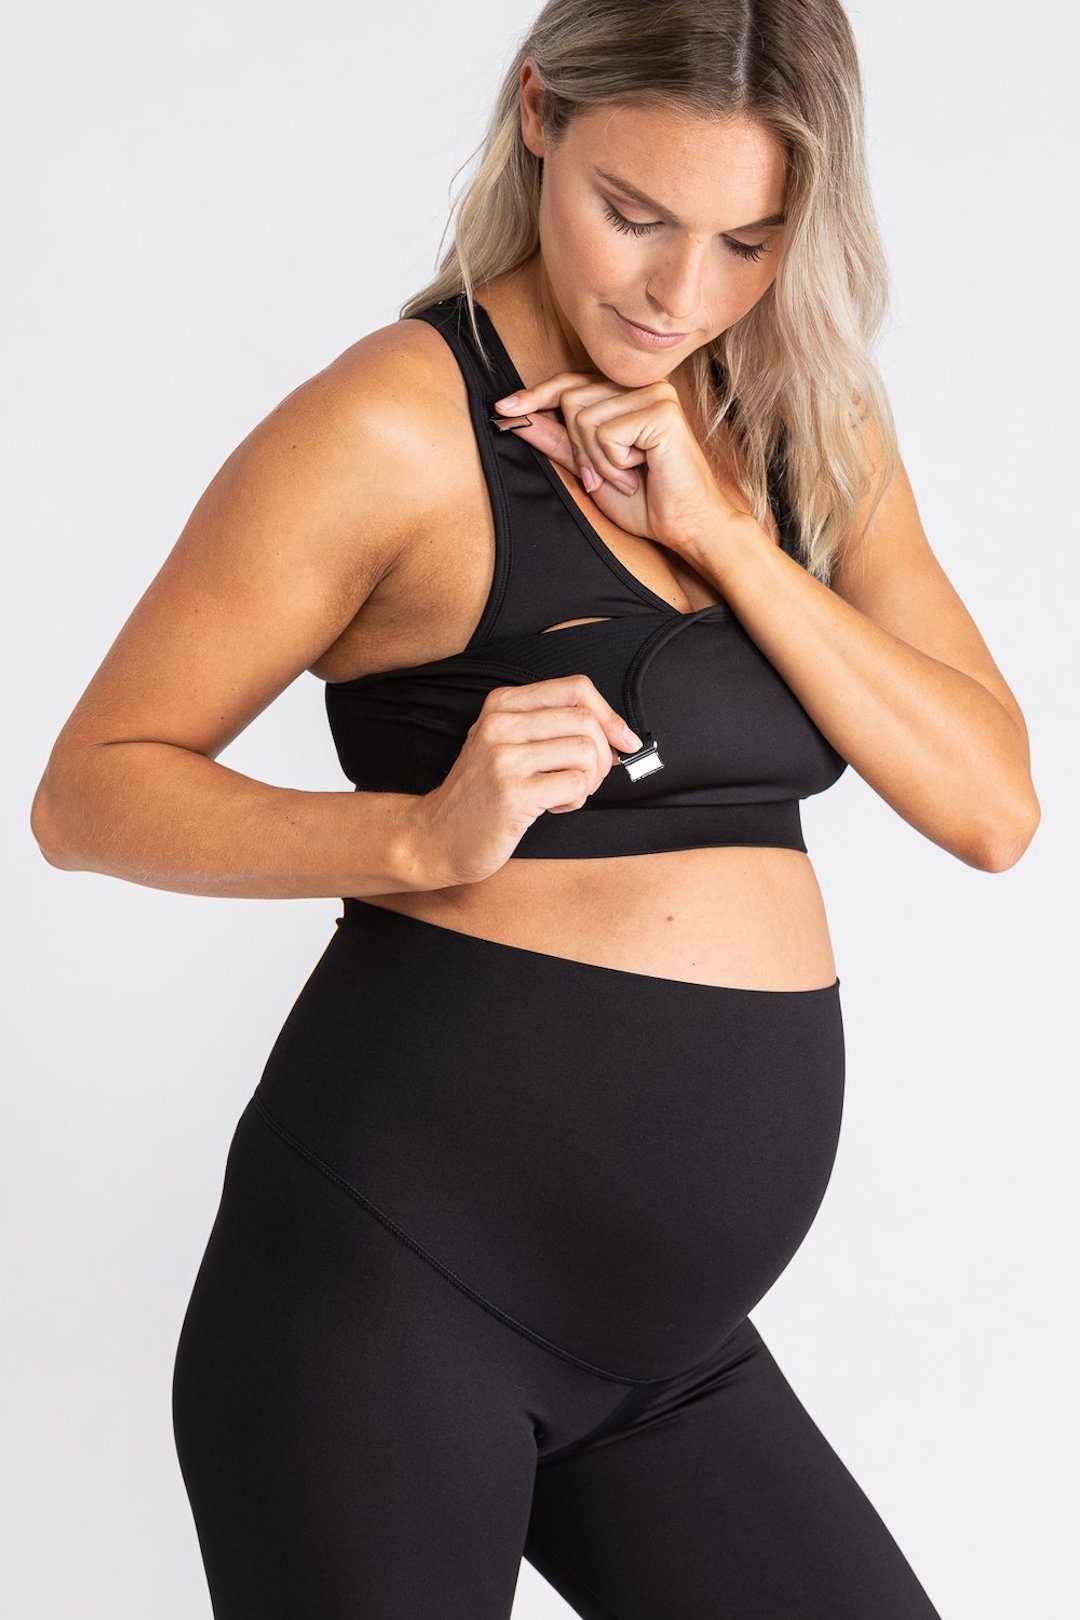 A pregnant woman wears a chic maternity breastfeeding crop top.